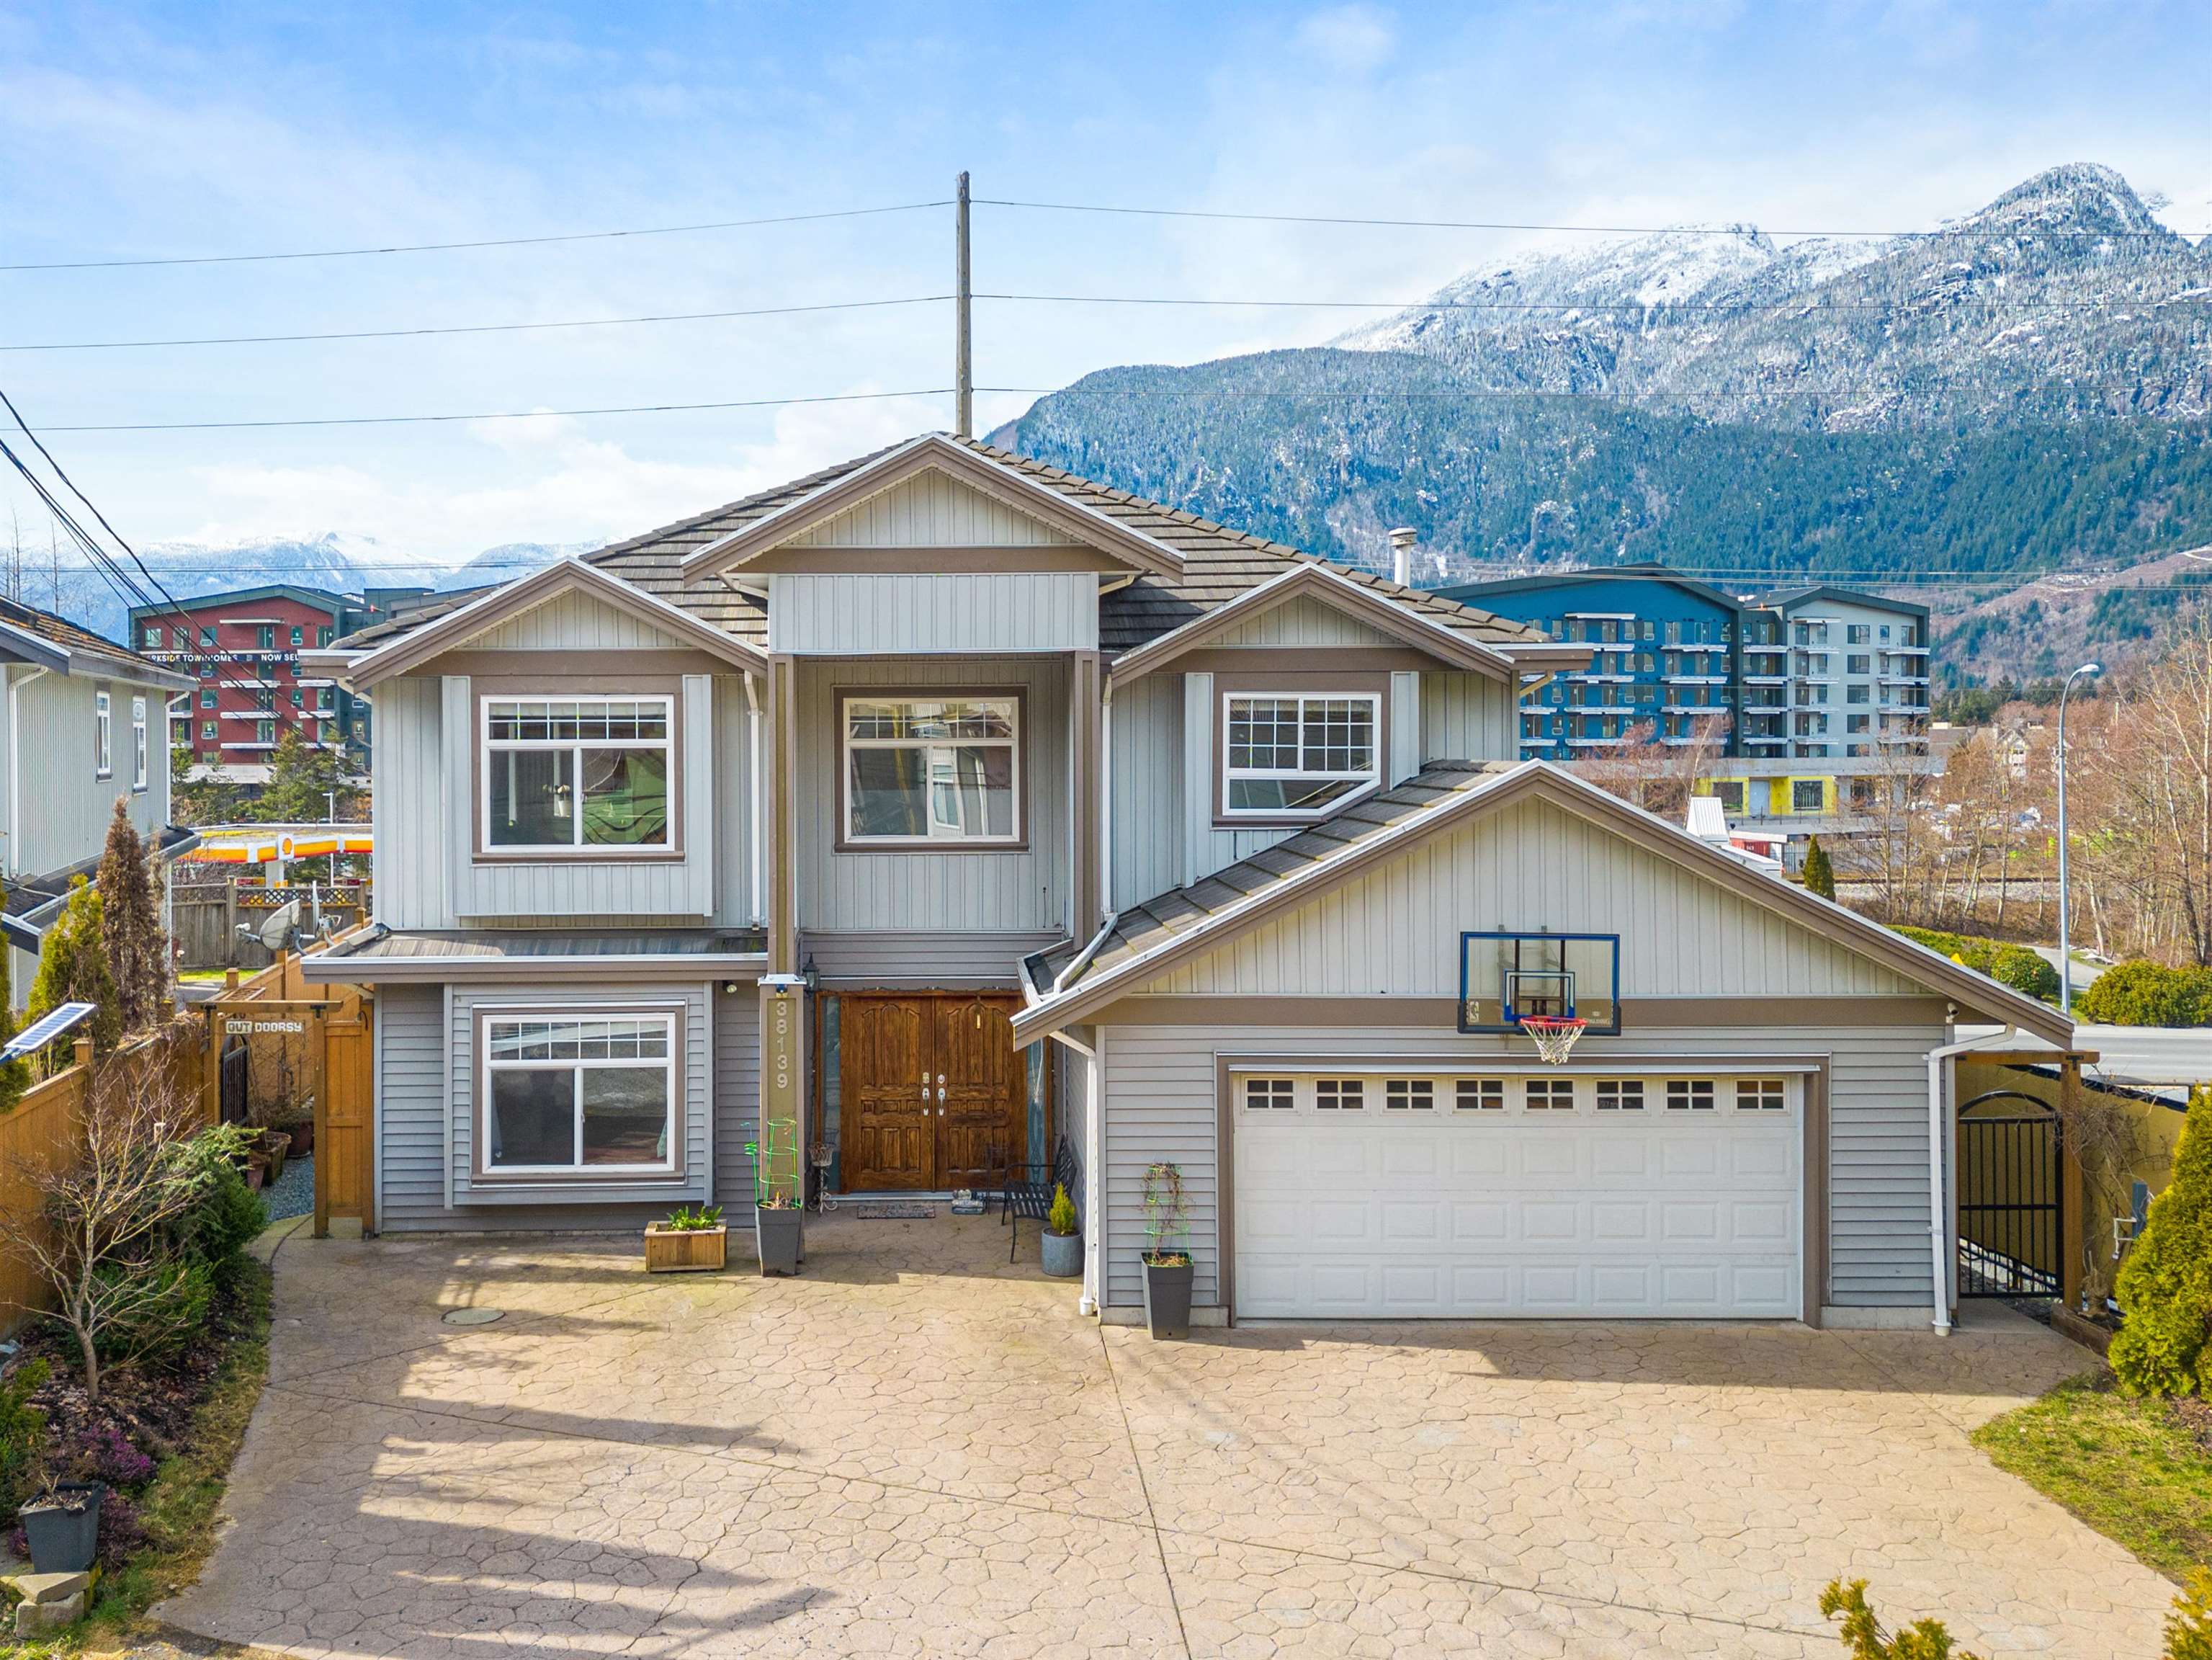 Listing image of 38139 HARBOUR VIEW PLACE